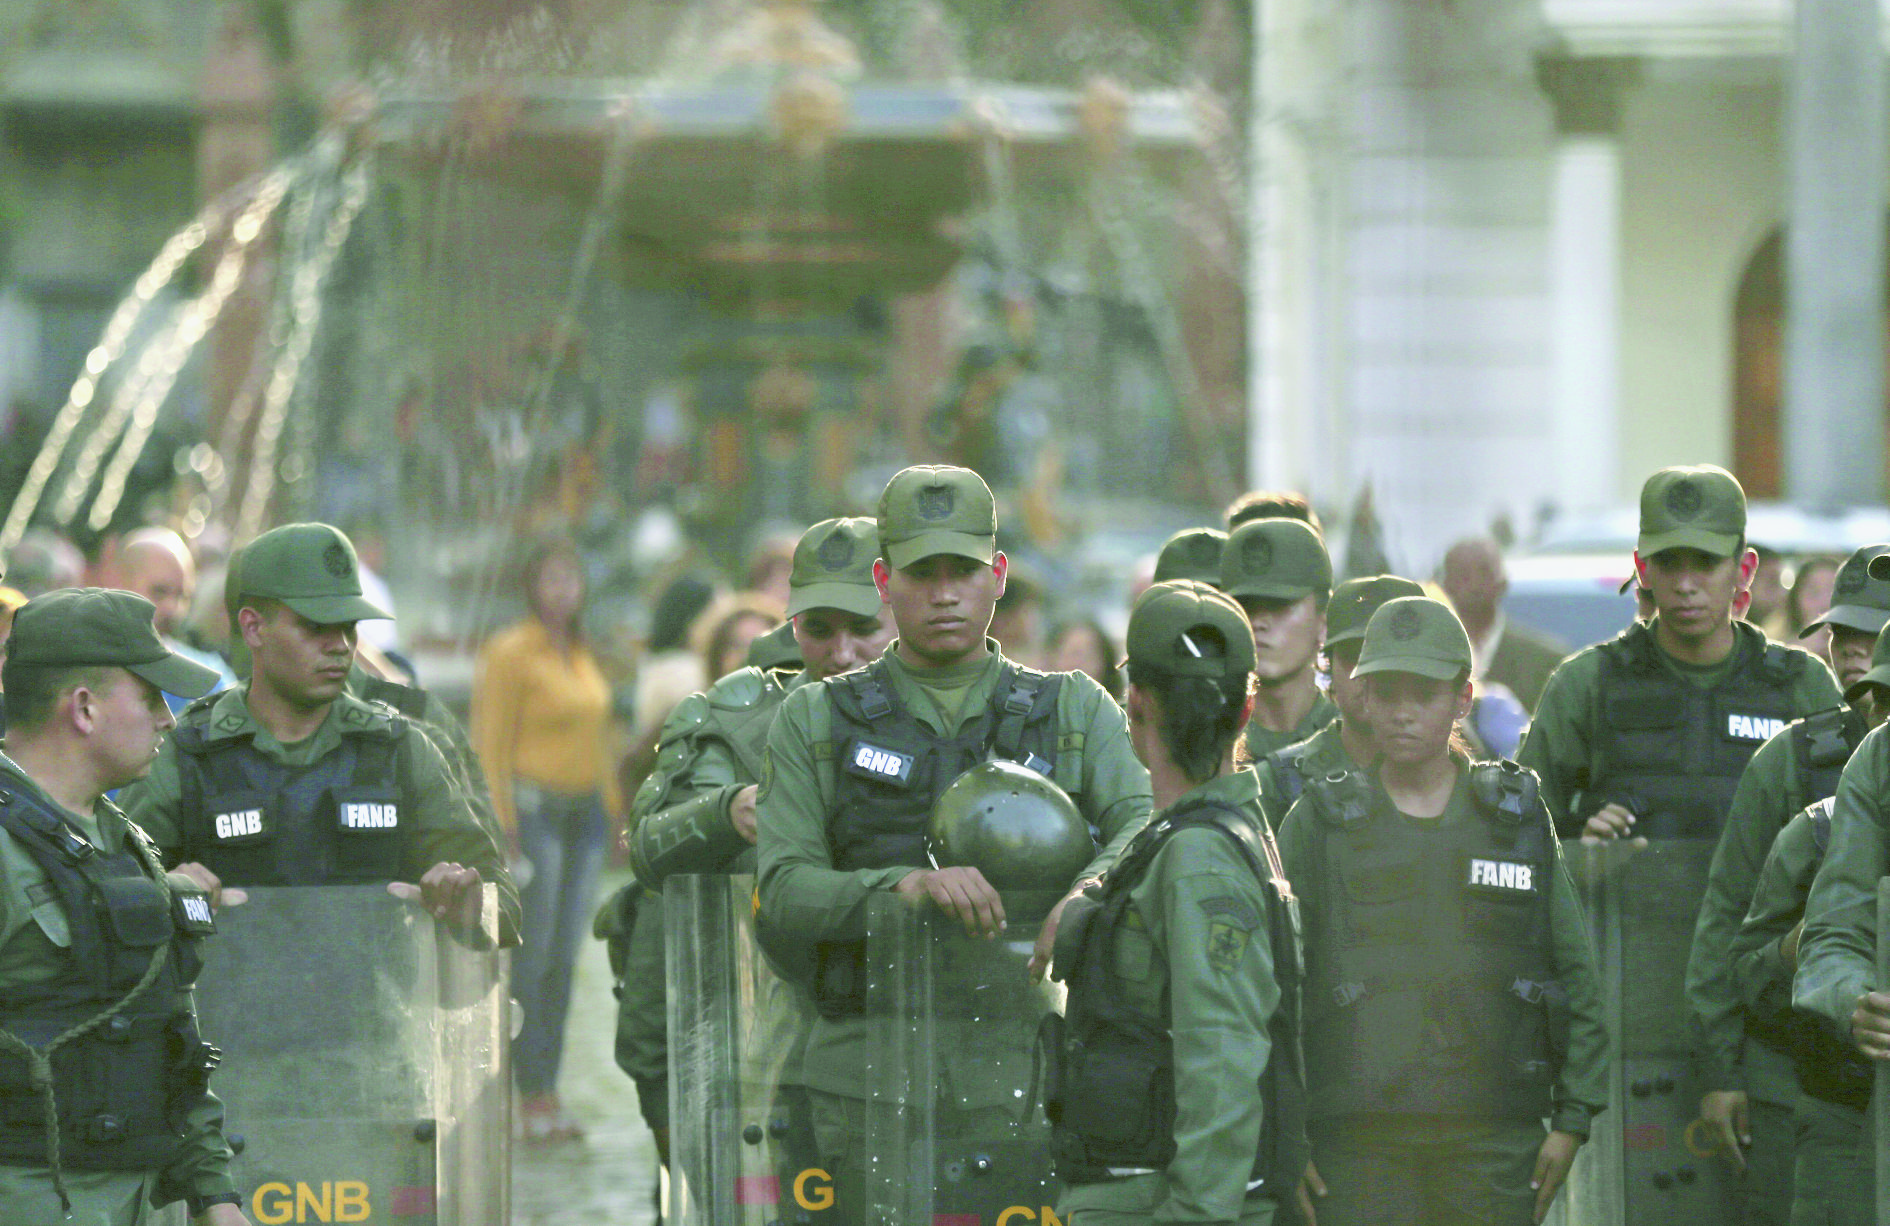 Venezuelan Bolivarian National Guard soldiers dressed in riot gear lineup inside of National Assembly building in Caracas, Venezuela, Tuesday, June 27, 2017. Opposition lawmakers got into fisticuffs with national guardsmen as they tried to enter the National Assembly. In a video circulating on social media, the commander of a national guard unit protecting the legislature aggressively shoved congress president Julio Borges as he was walking away from a heated discussion. (AP Photo/Fernando Llano)